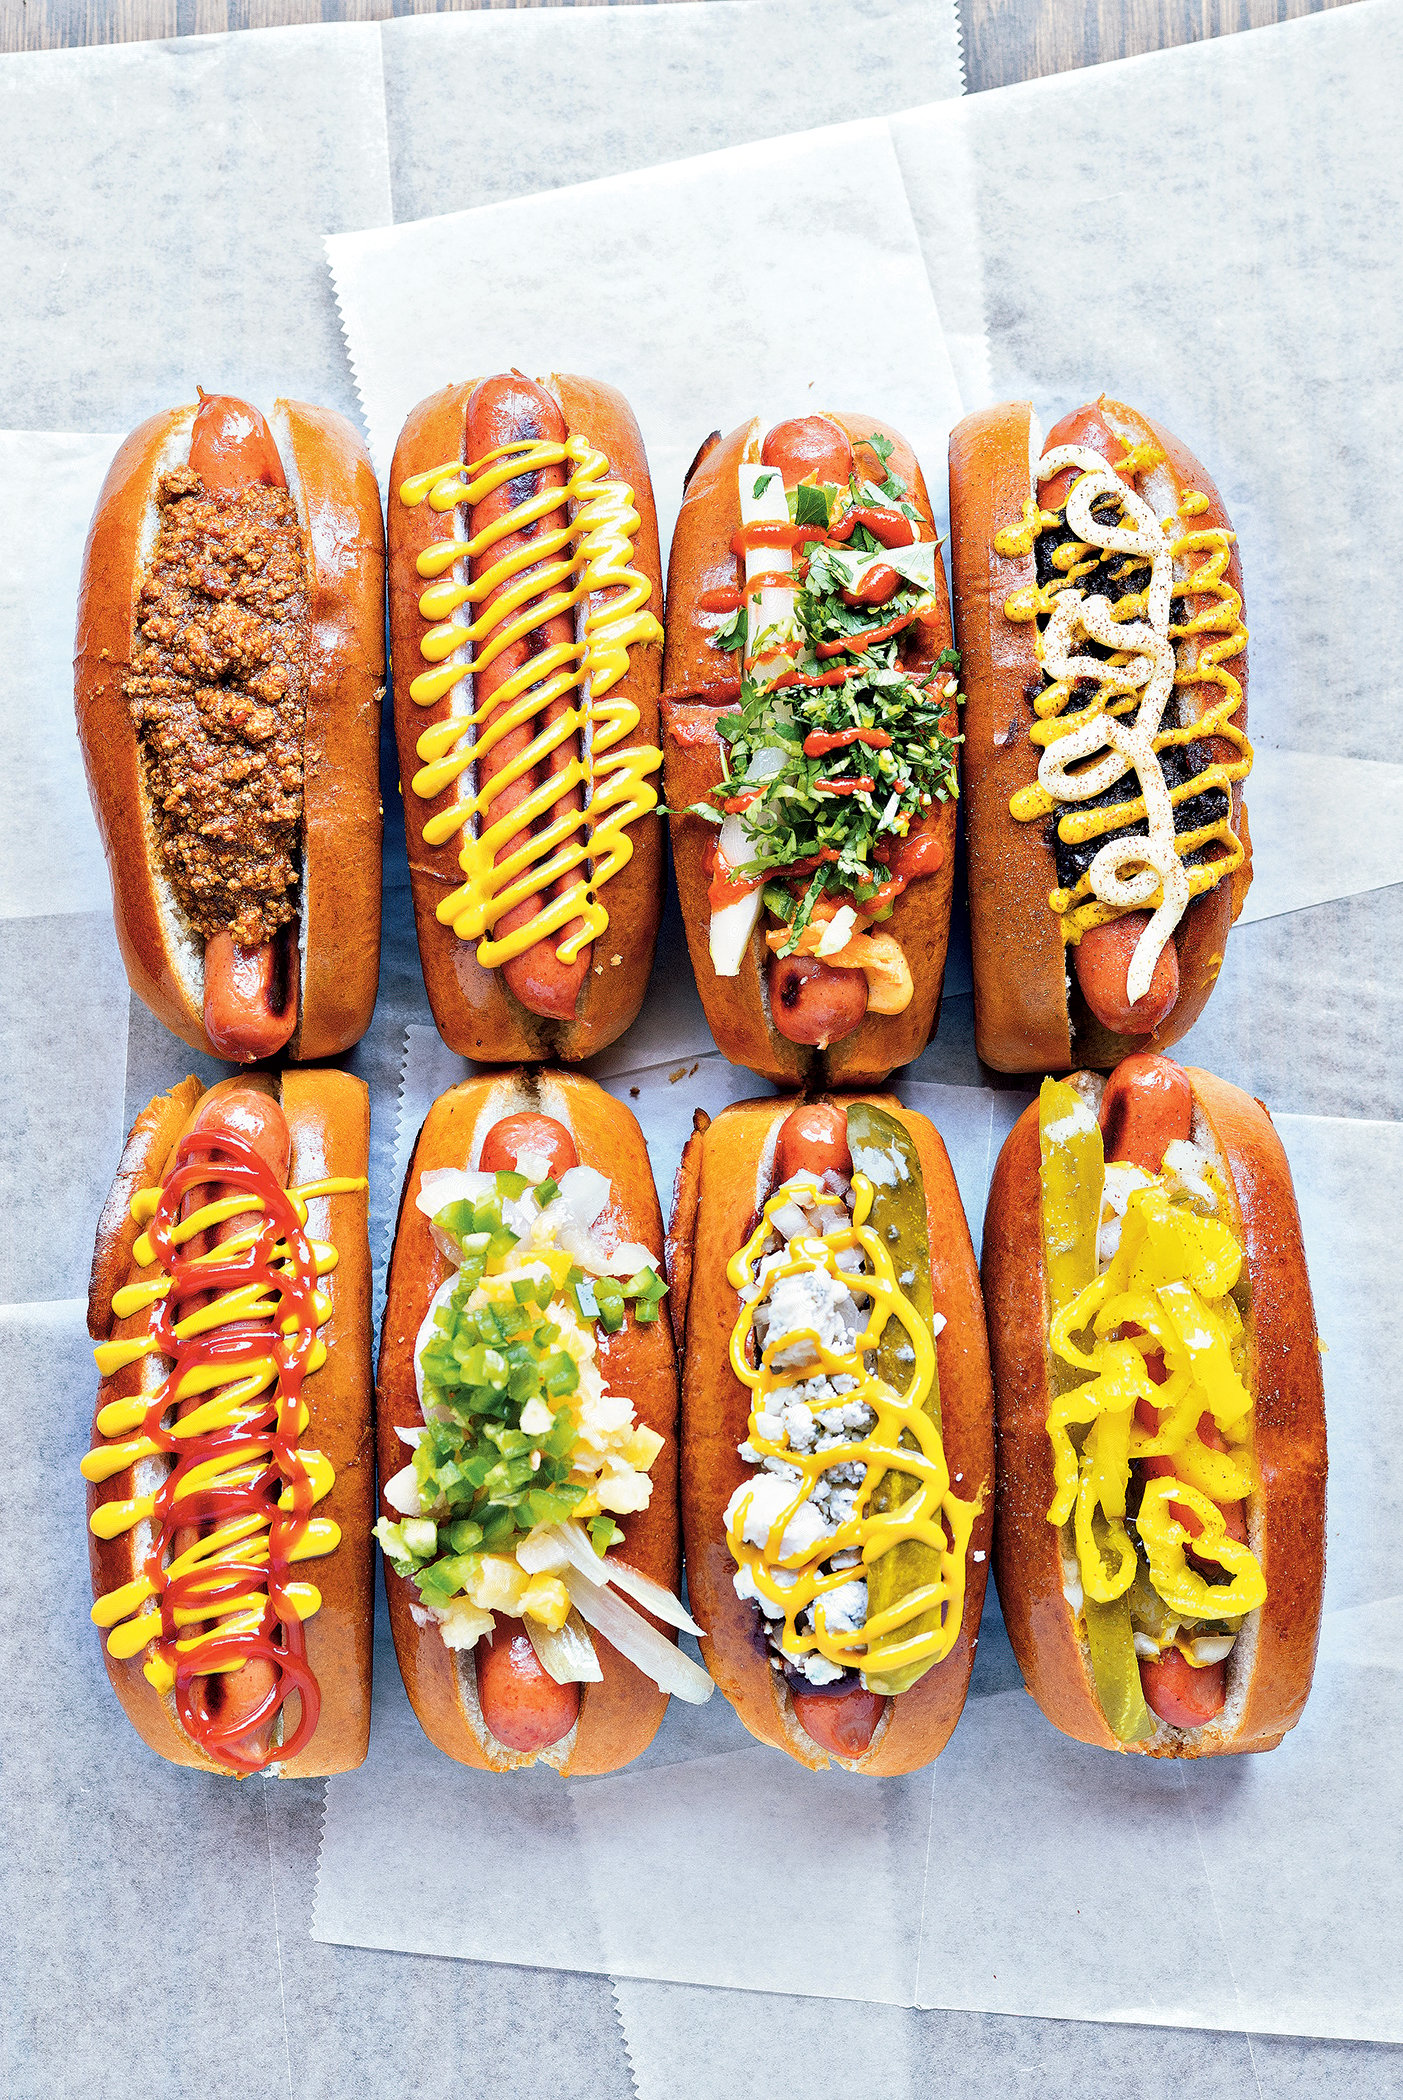 Franks at Haute Dogs and Fries. Photograph by Scott Suchman.